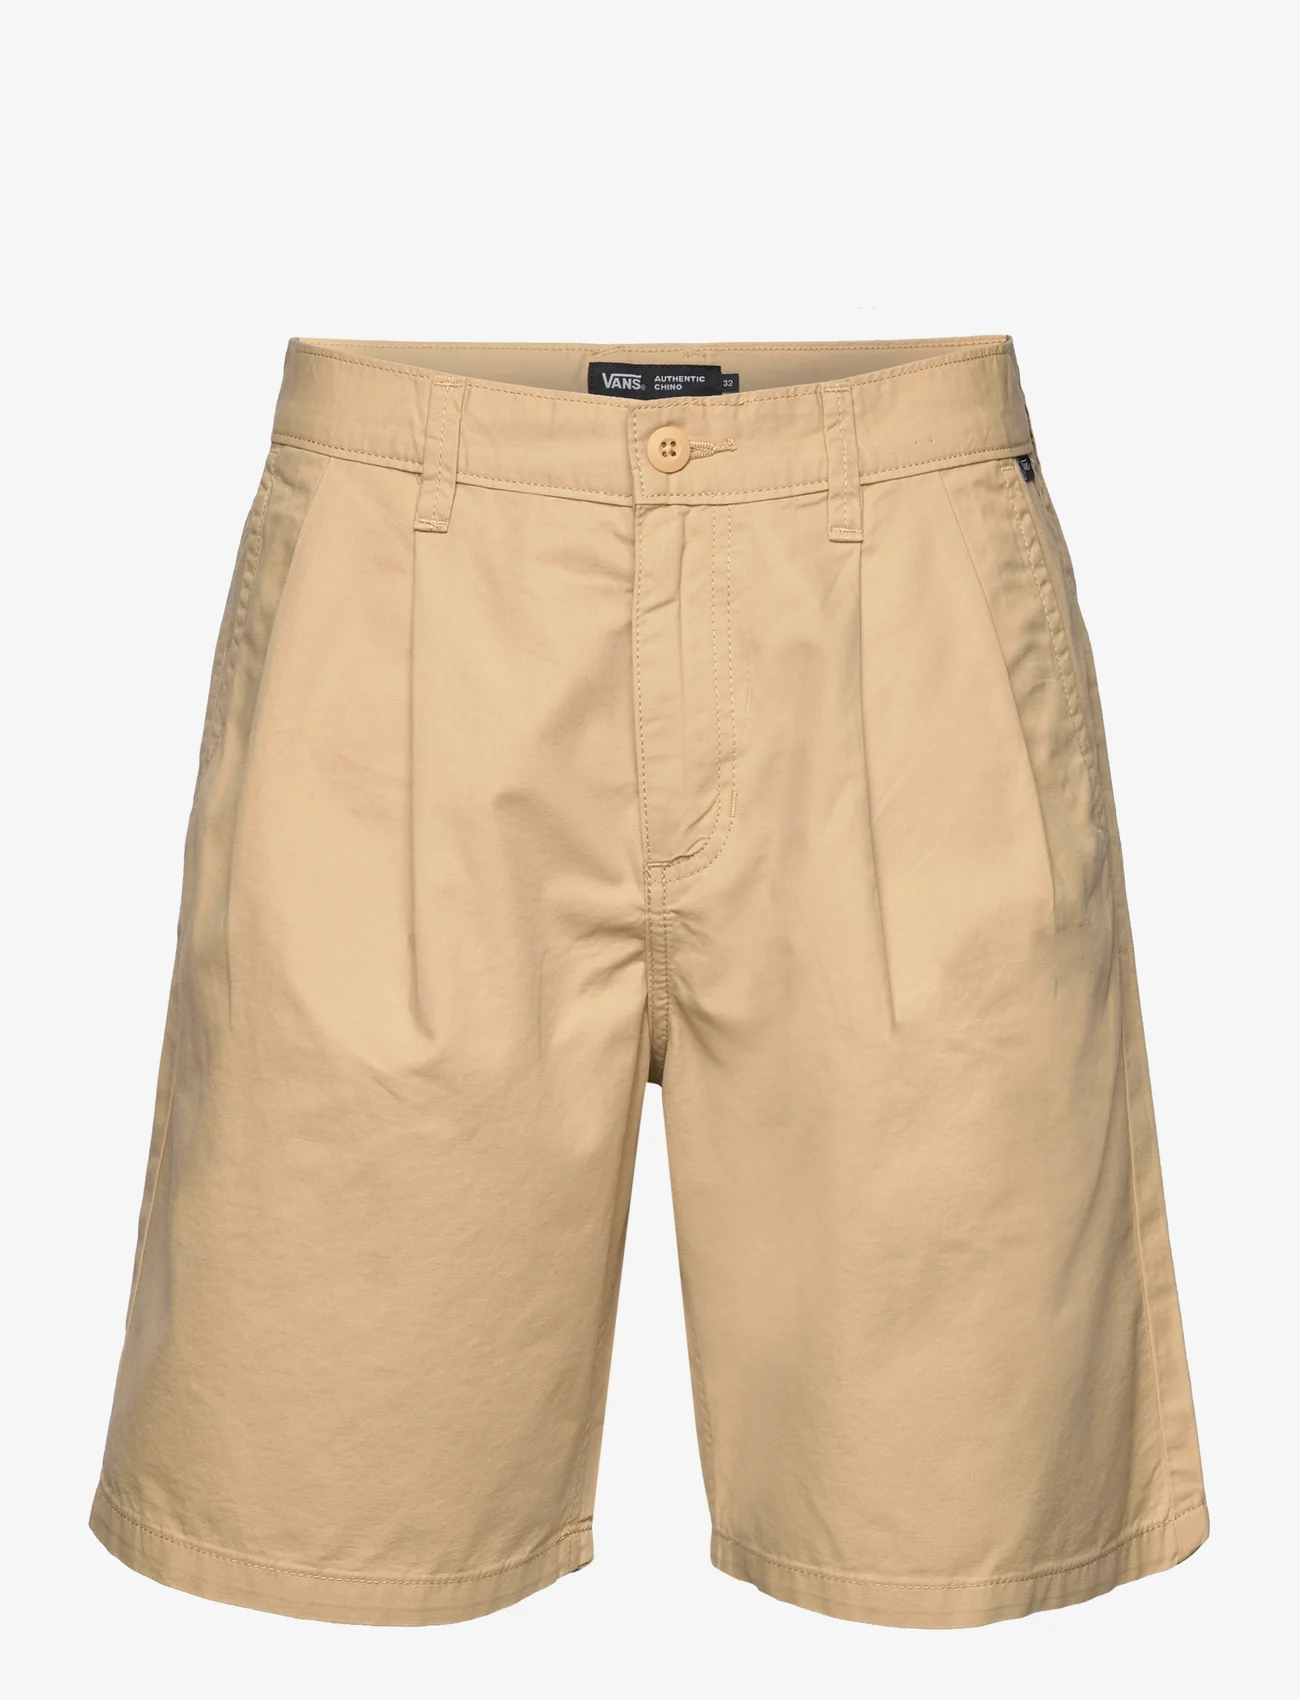 VANS - AUTHENTIC CHINO PLEATED LOOSE SHORT - chino shorts - taos taupe - 0